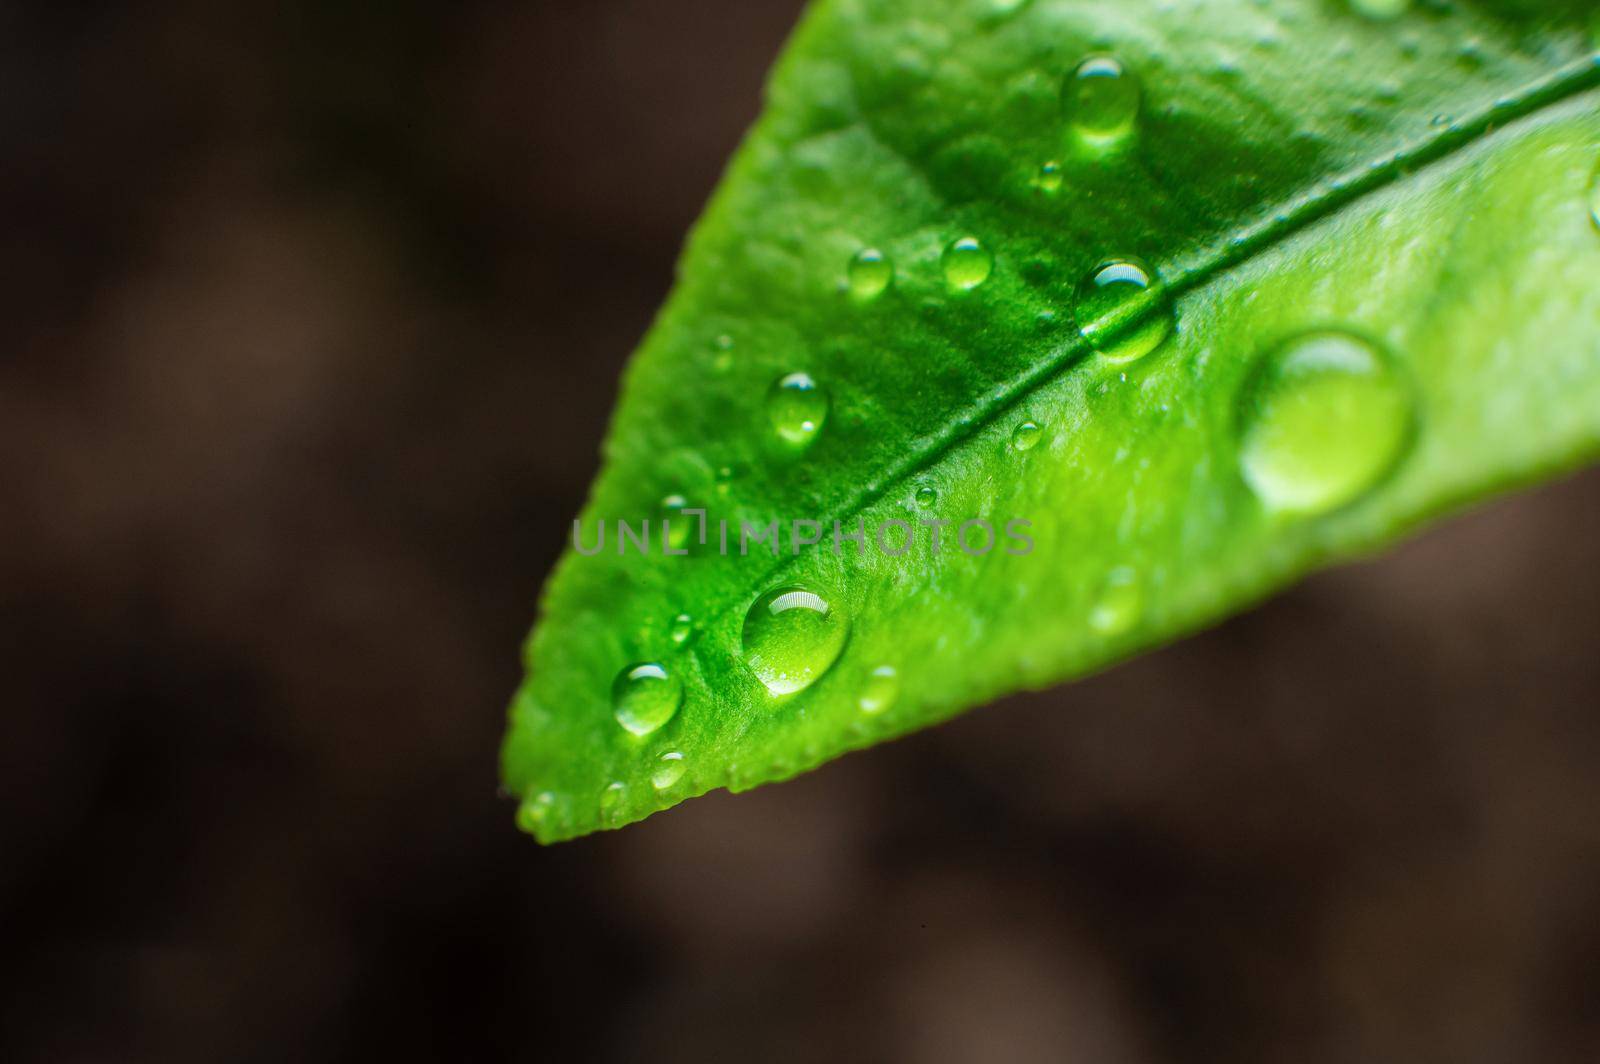 a round drop of pure transparent water lies on a green juicy leaf of grass. close-up, studio shooting